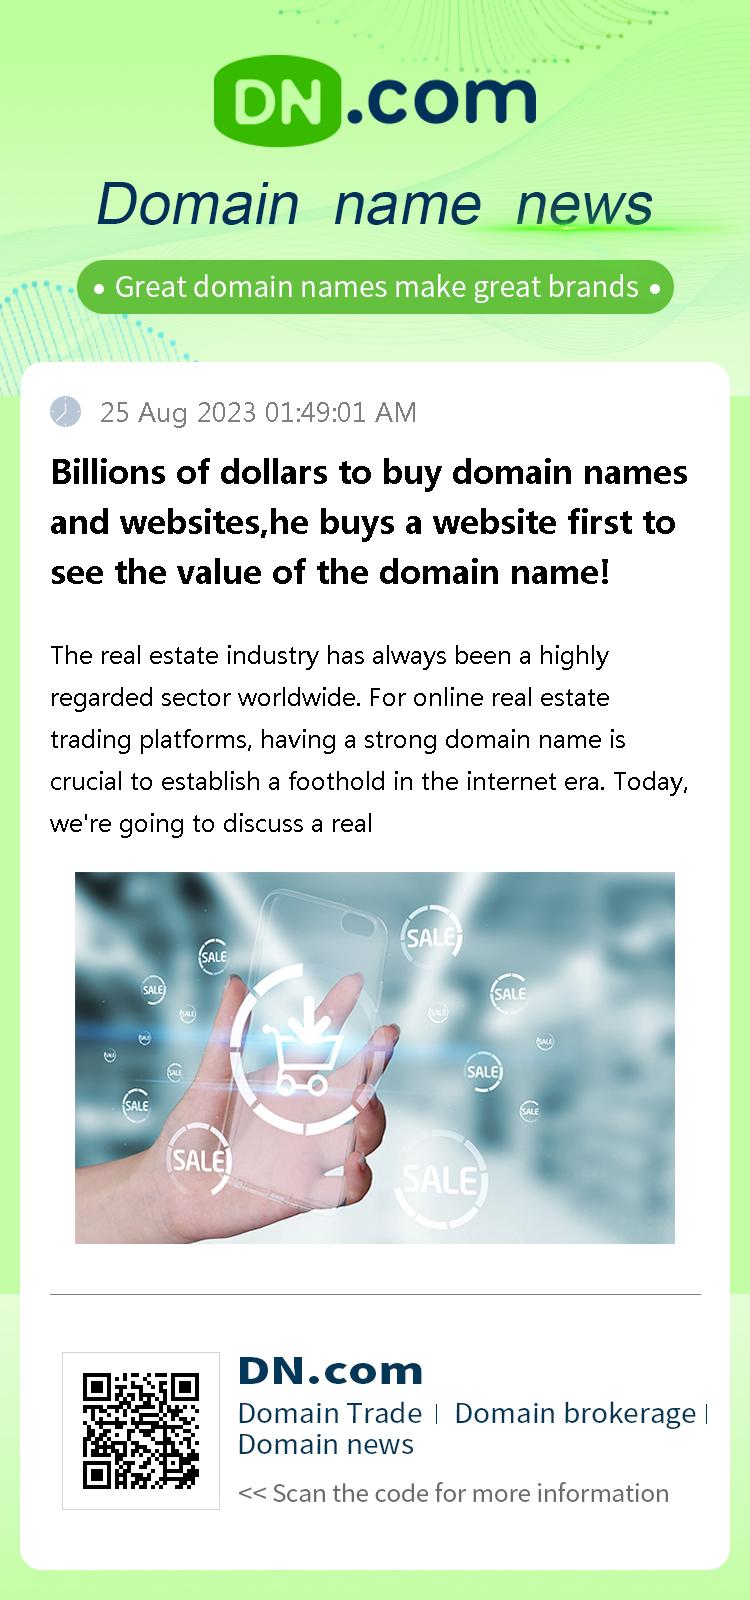 Billions of dollars to buy domain names and websites,he buys a website first to see the value of the domain name!